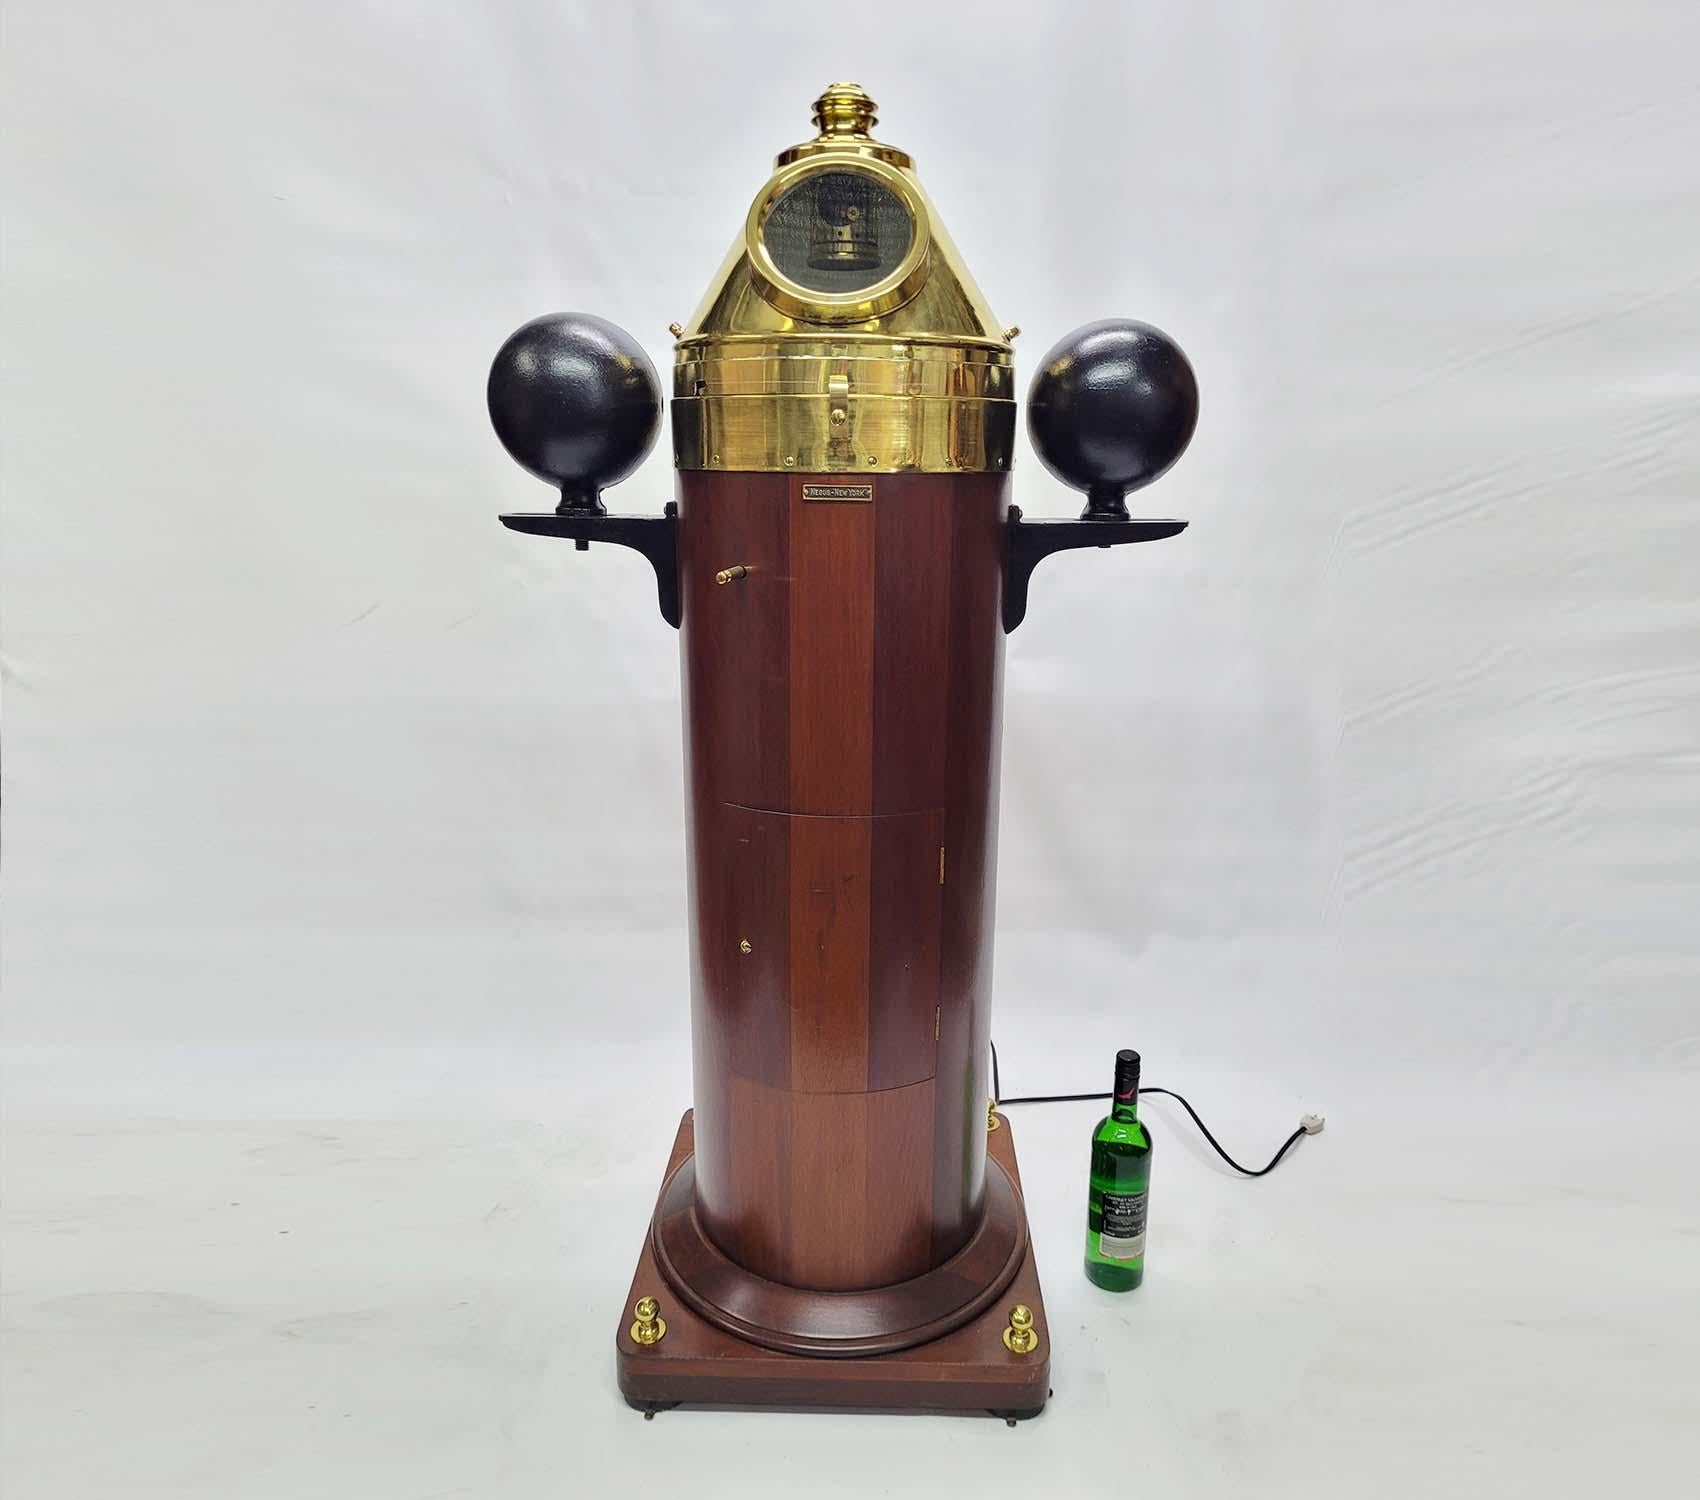 Magnificent Yacht Binnacle by American Ships chandler Negus of New York. Meticulously polished and lacquered brasses on this nautical relic. The gimballed compass is engraved with makers name E.S. Ritchie and Sons Inc., Boston mass and serial number